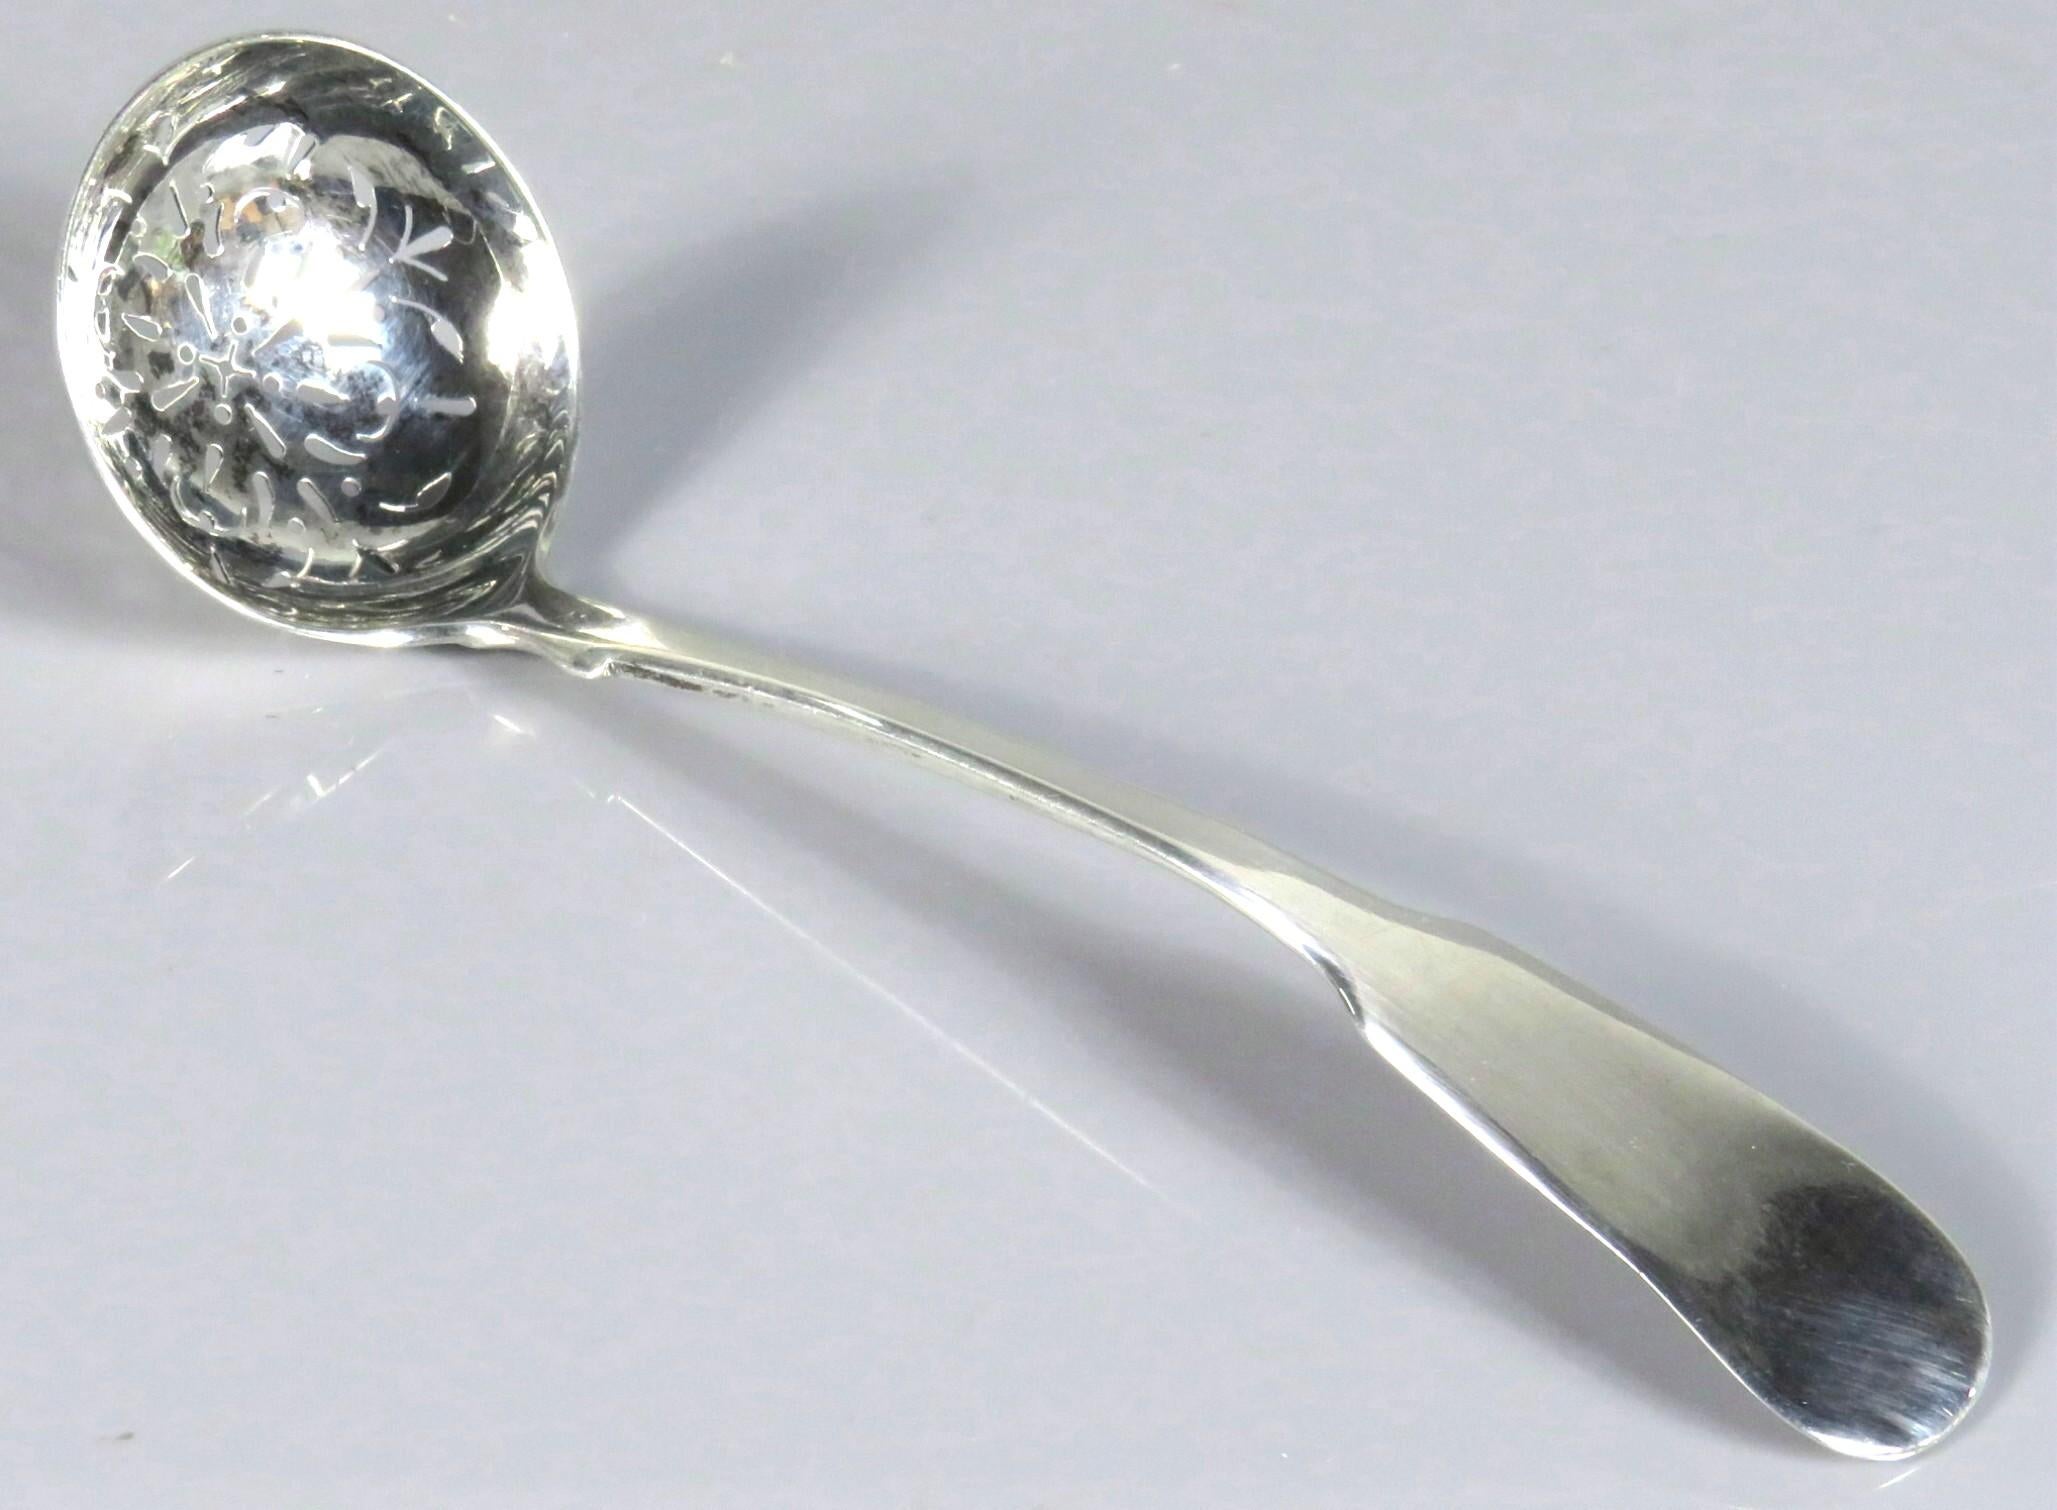 A fine early 19th century George IV sterling silver sugar sifting ladle, showing a finely pierced bowl and bearing Glasgow Hallmarks with date marks for 1826 and maker's marks for Scottish silversmith John Mitchell.